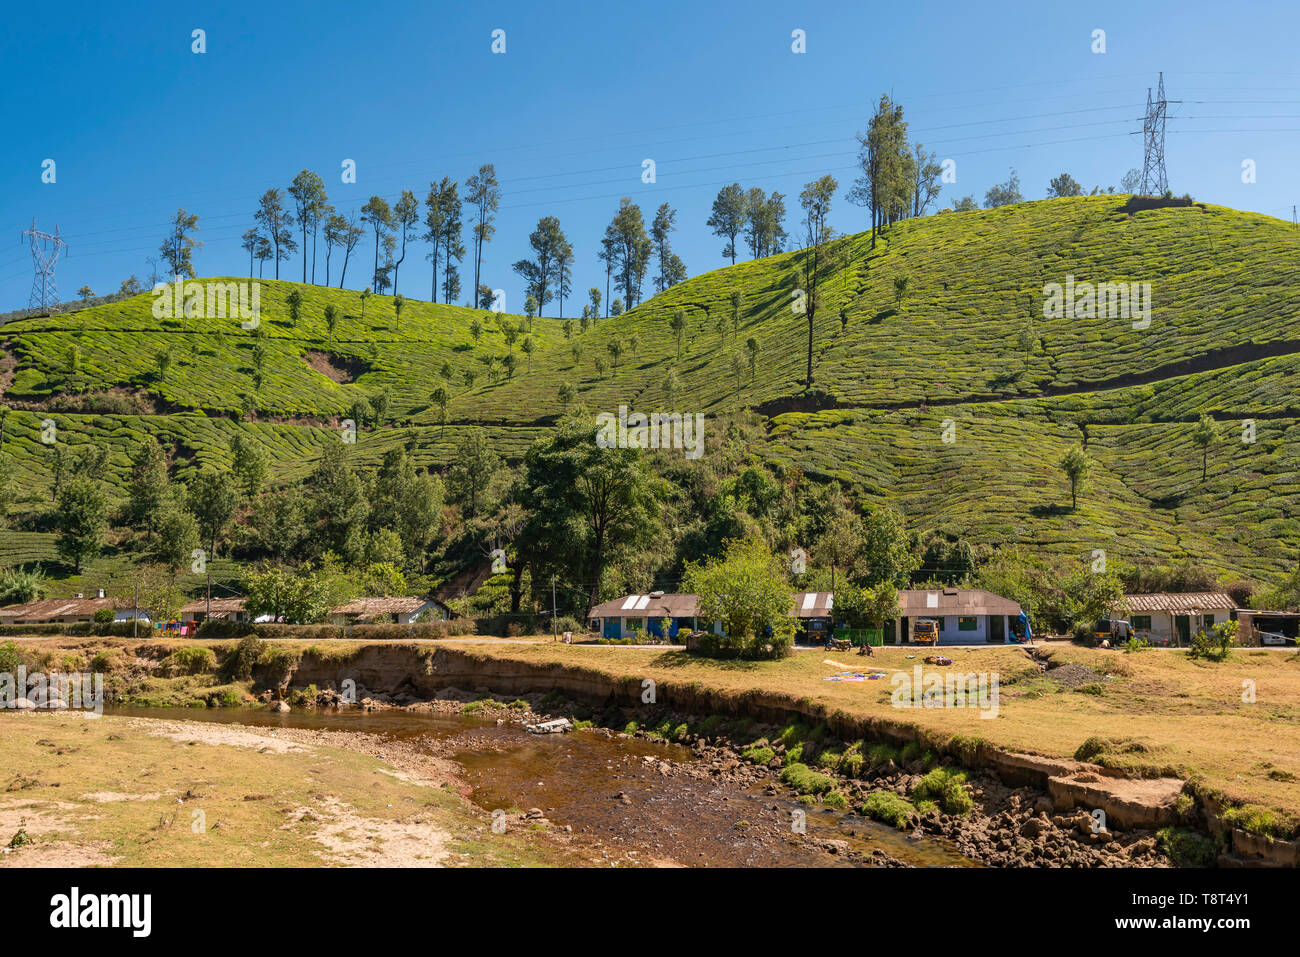 Horizontal view of a row of hillside cottages infront of a river in Munnar, India. Stock Photo